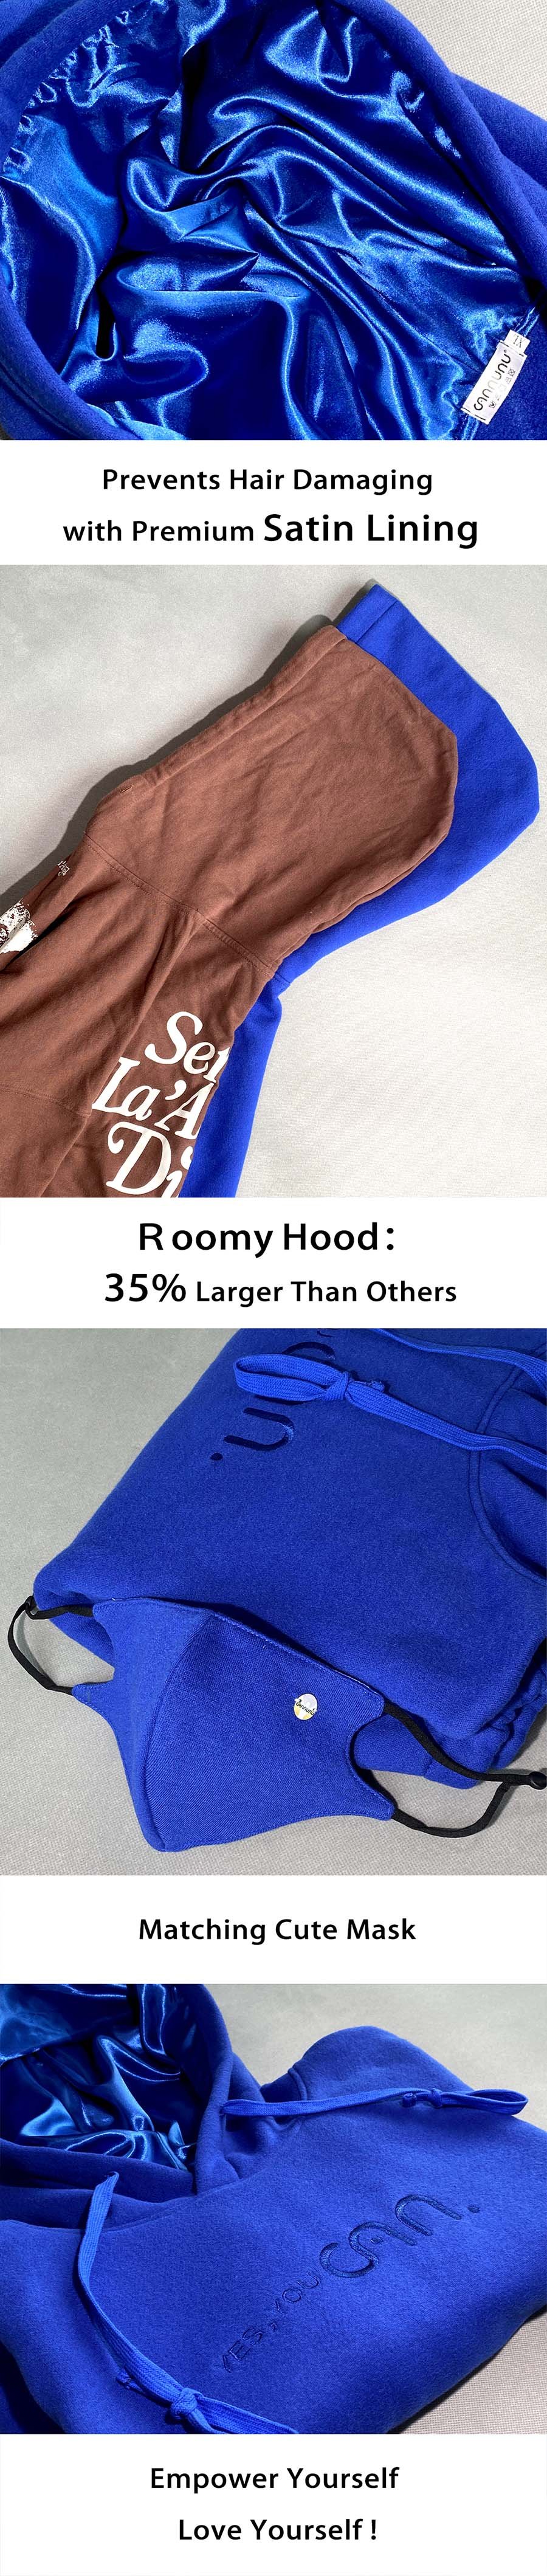 Cozy Crop Satin Lined Hoodie-Royal Blue – AnewCrown